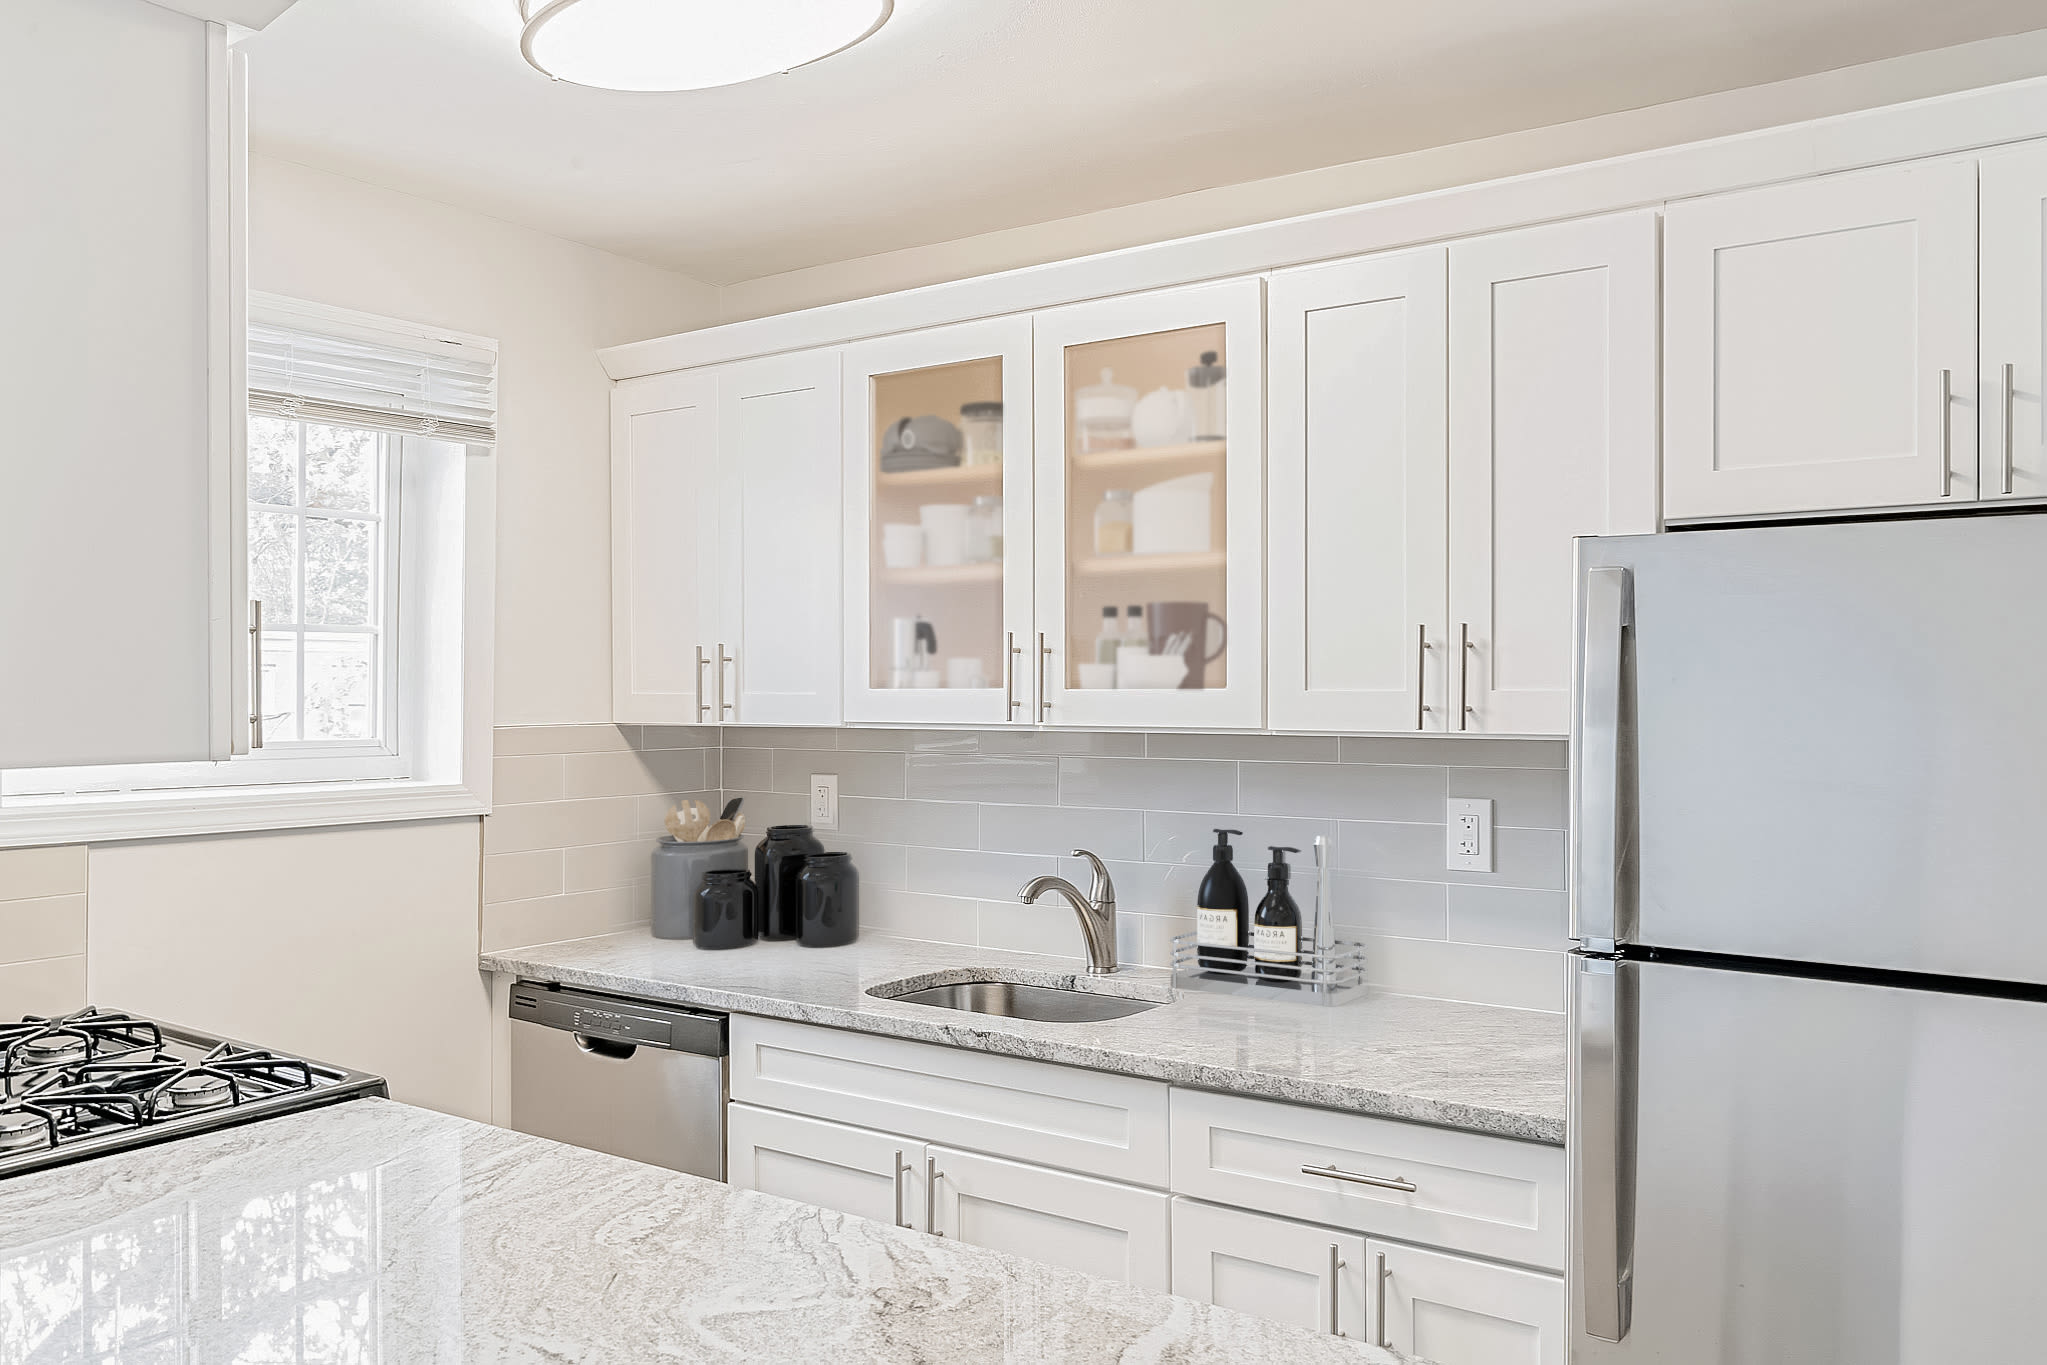 Detailed kitchen cabinetry at Eagle Rock Apartments at Carle Place in Carle Place, New York